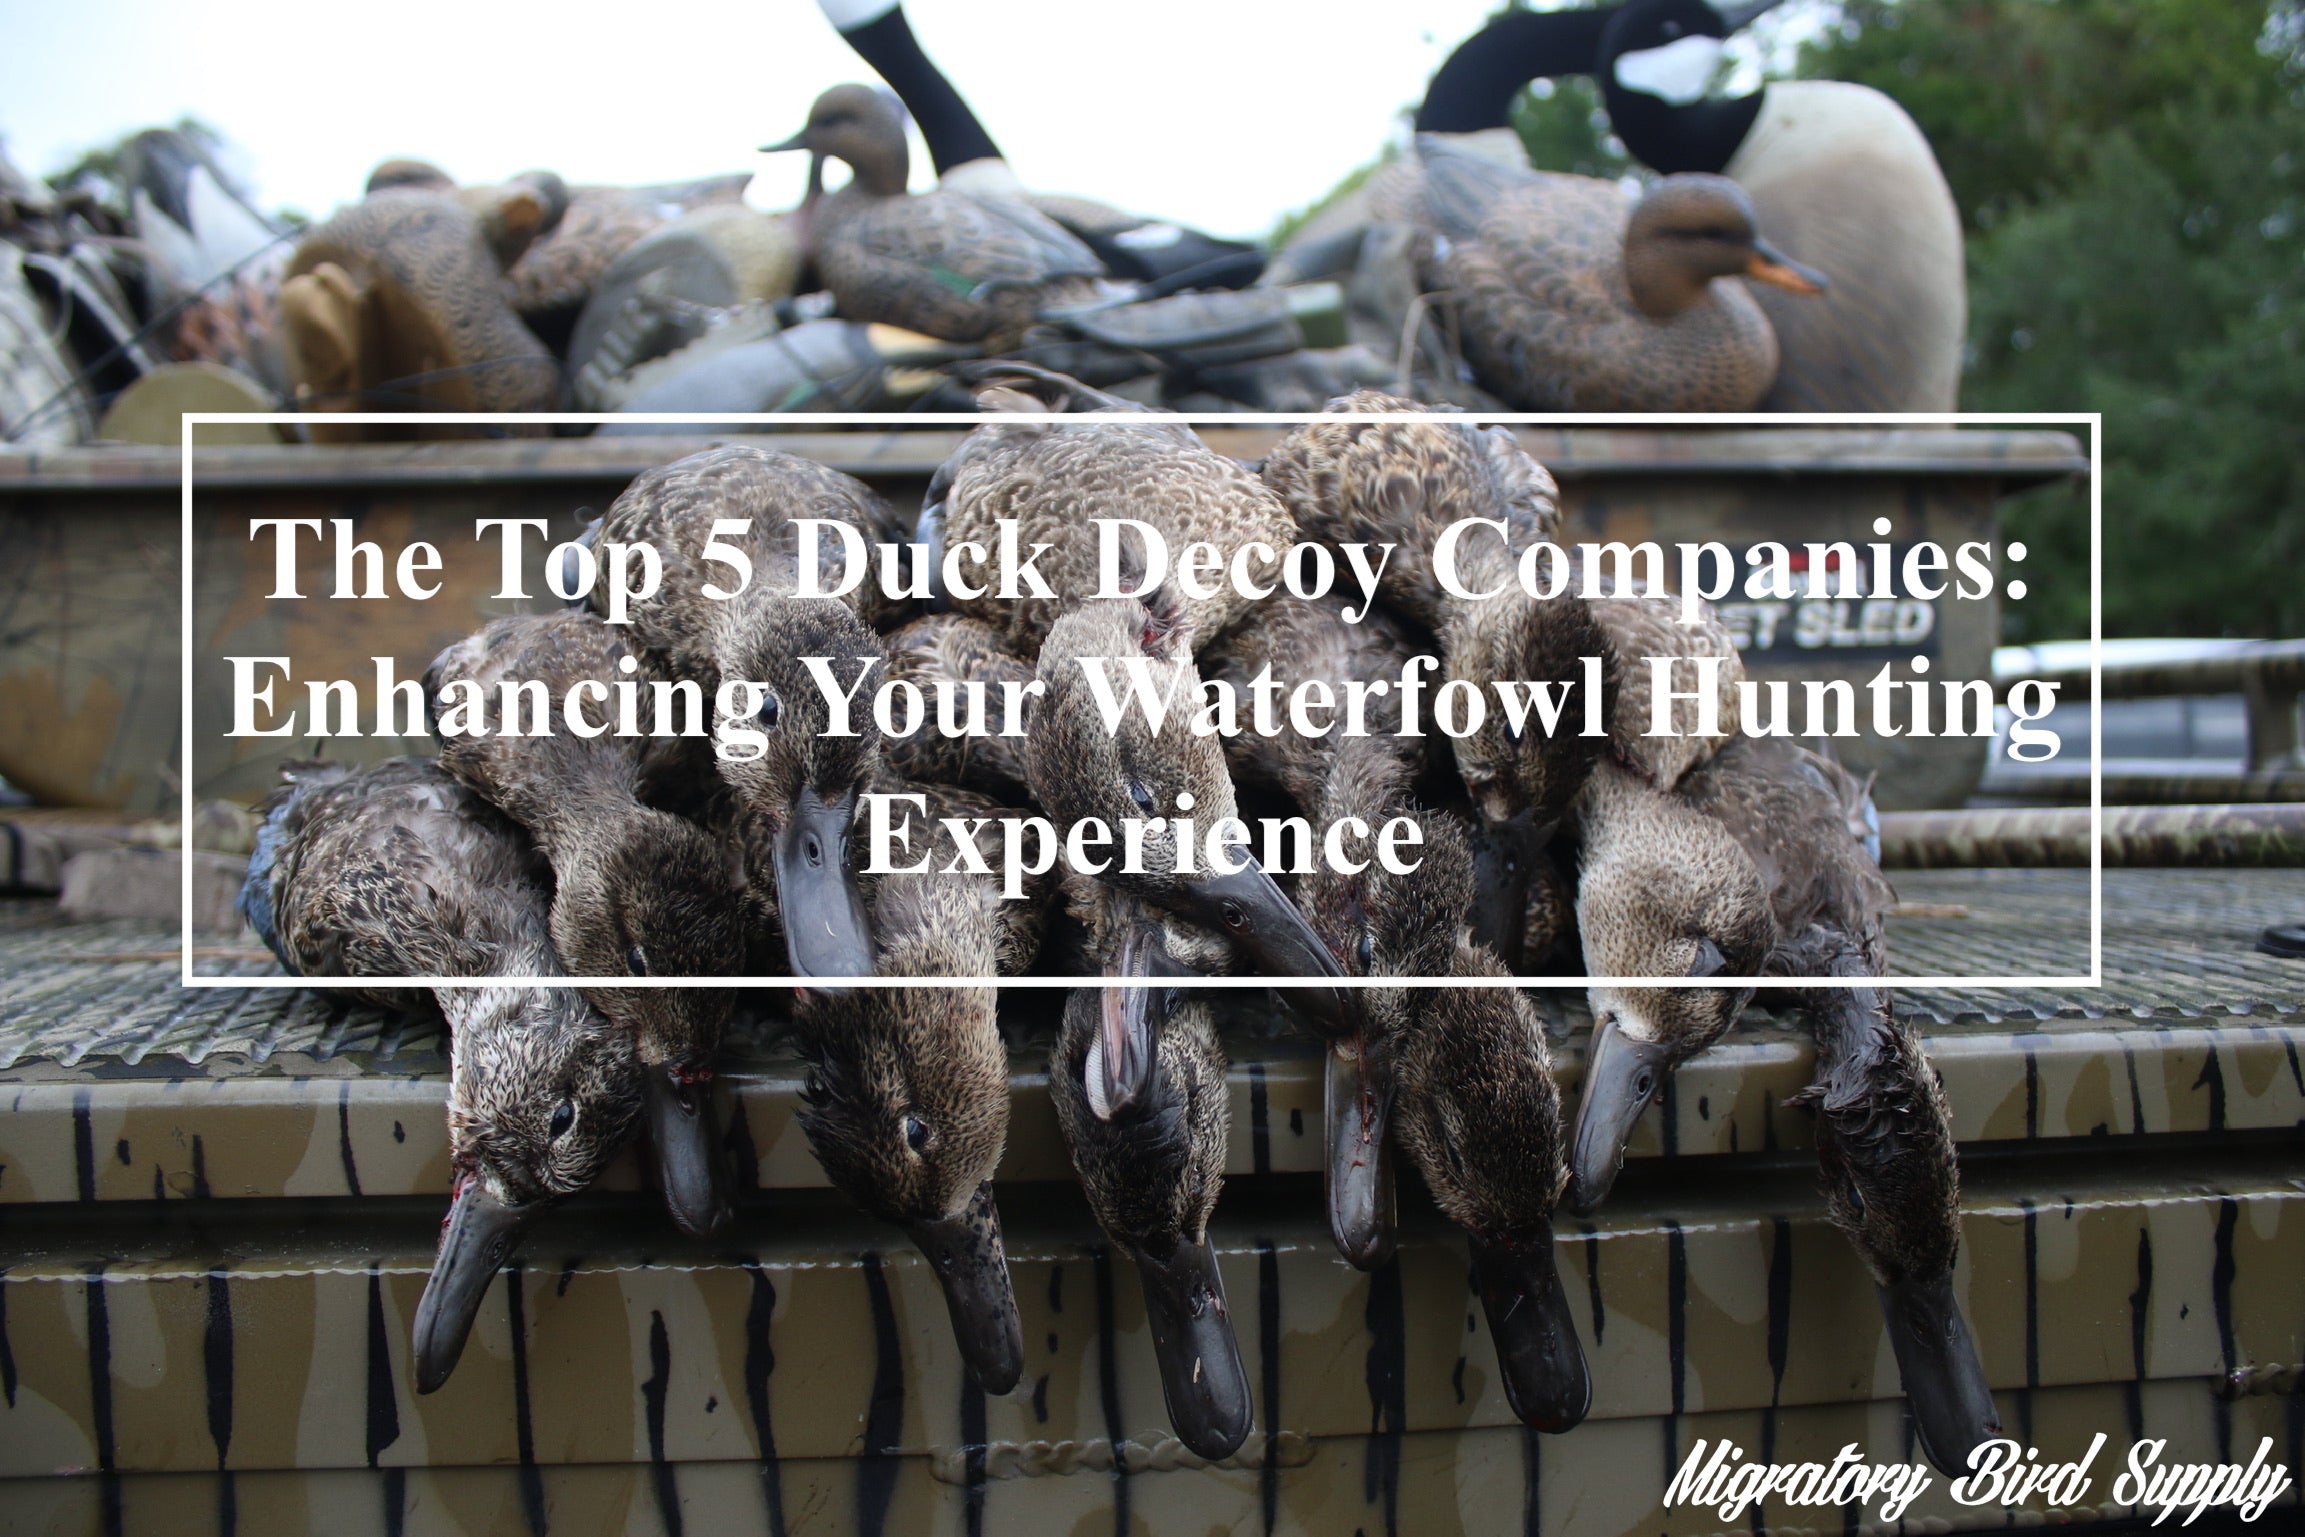 The Top 5 Duck Decoy Companies: Enhancing Your Waterfowl Hunting Experience